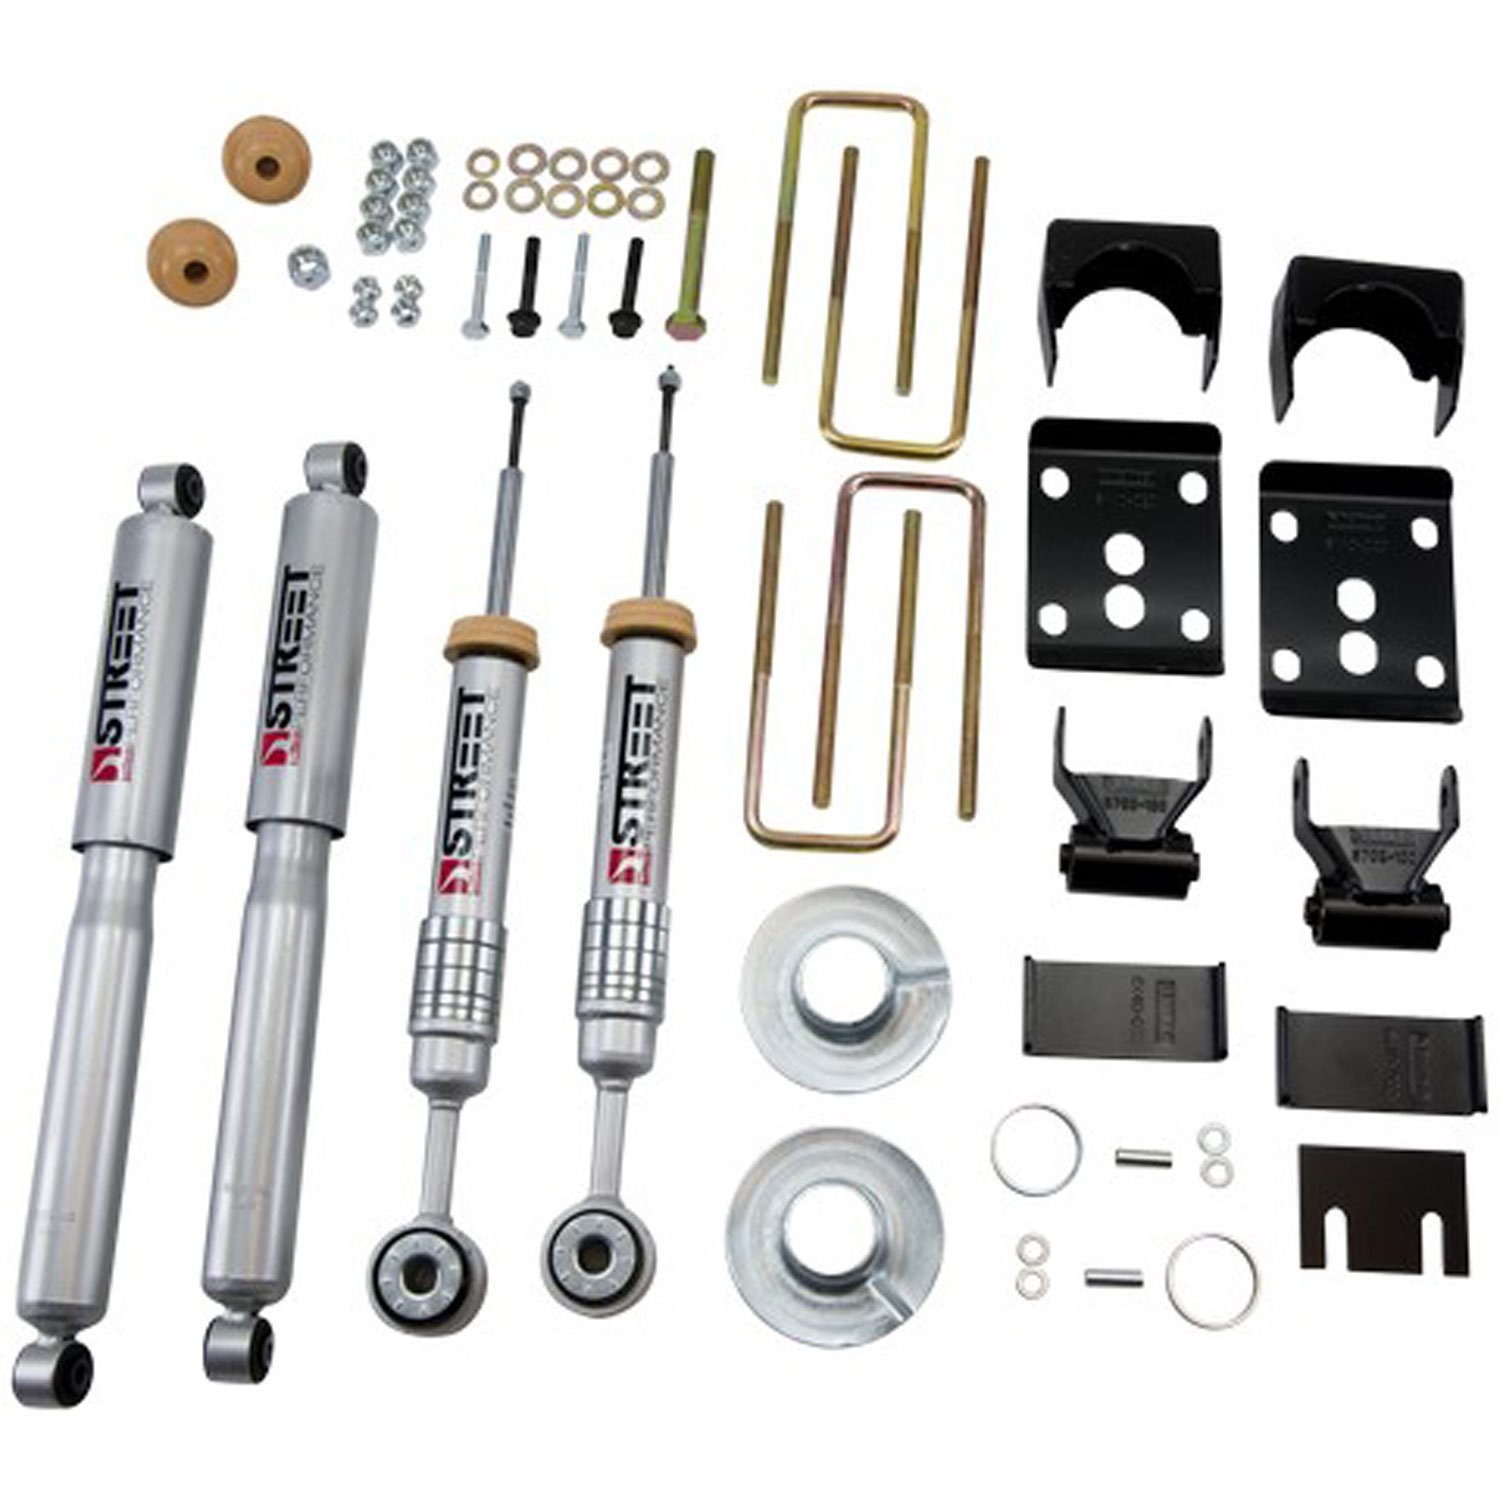 Complete Lowering Kit for 2009-2013 Ford F-150